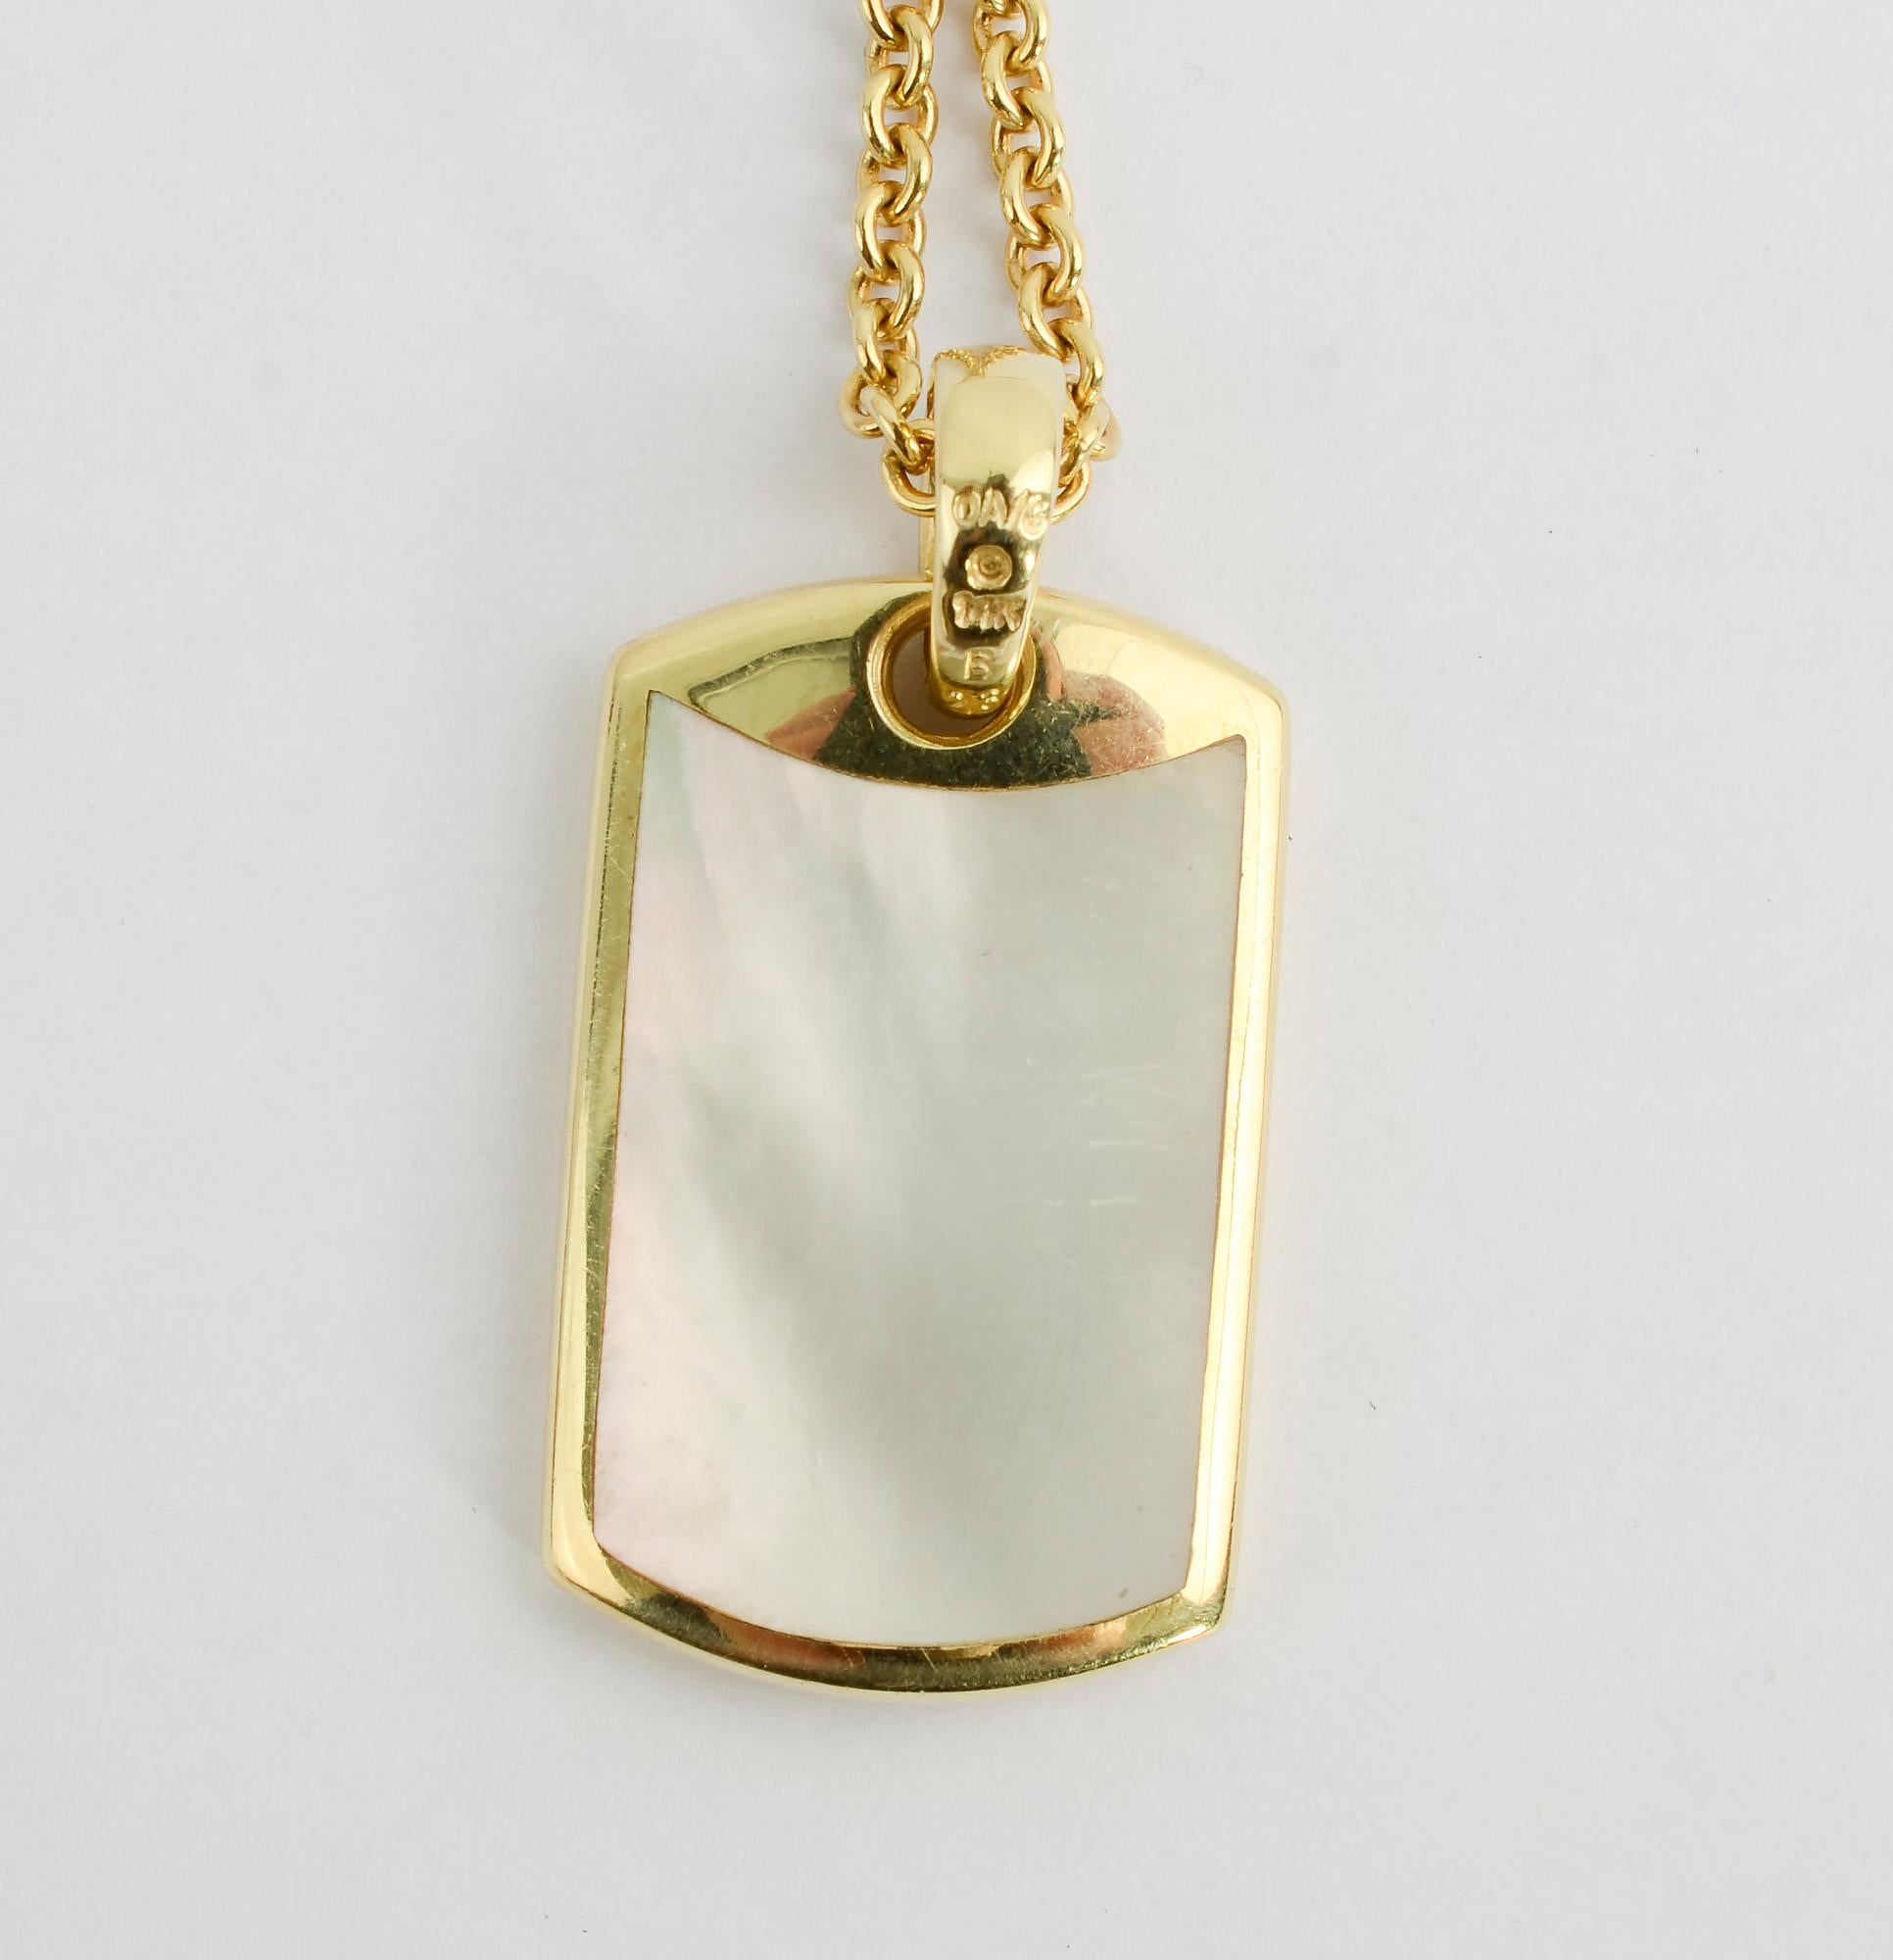 Brilliant Cut Asch Grossbardt Onyx, Mother of Pearl and Diamond Pendant Necklace